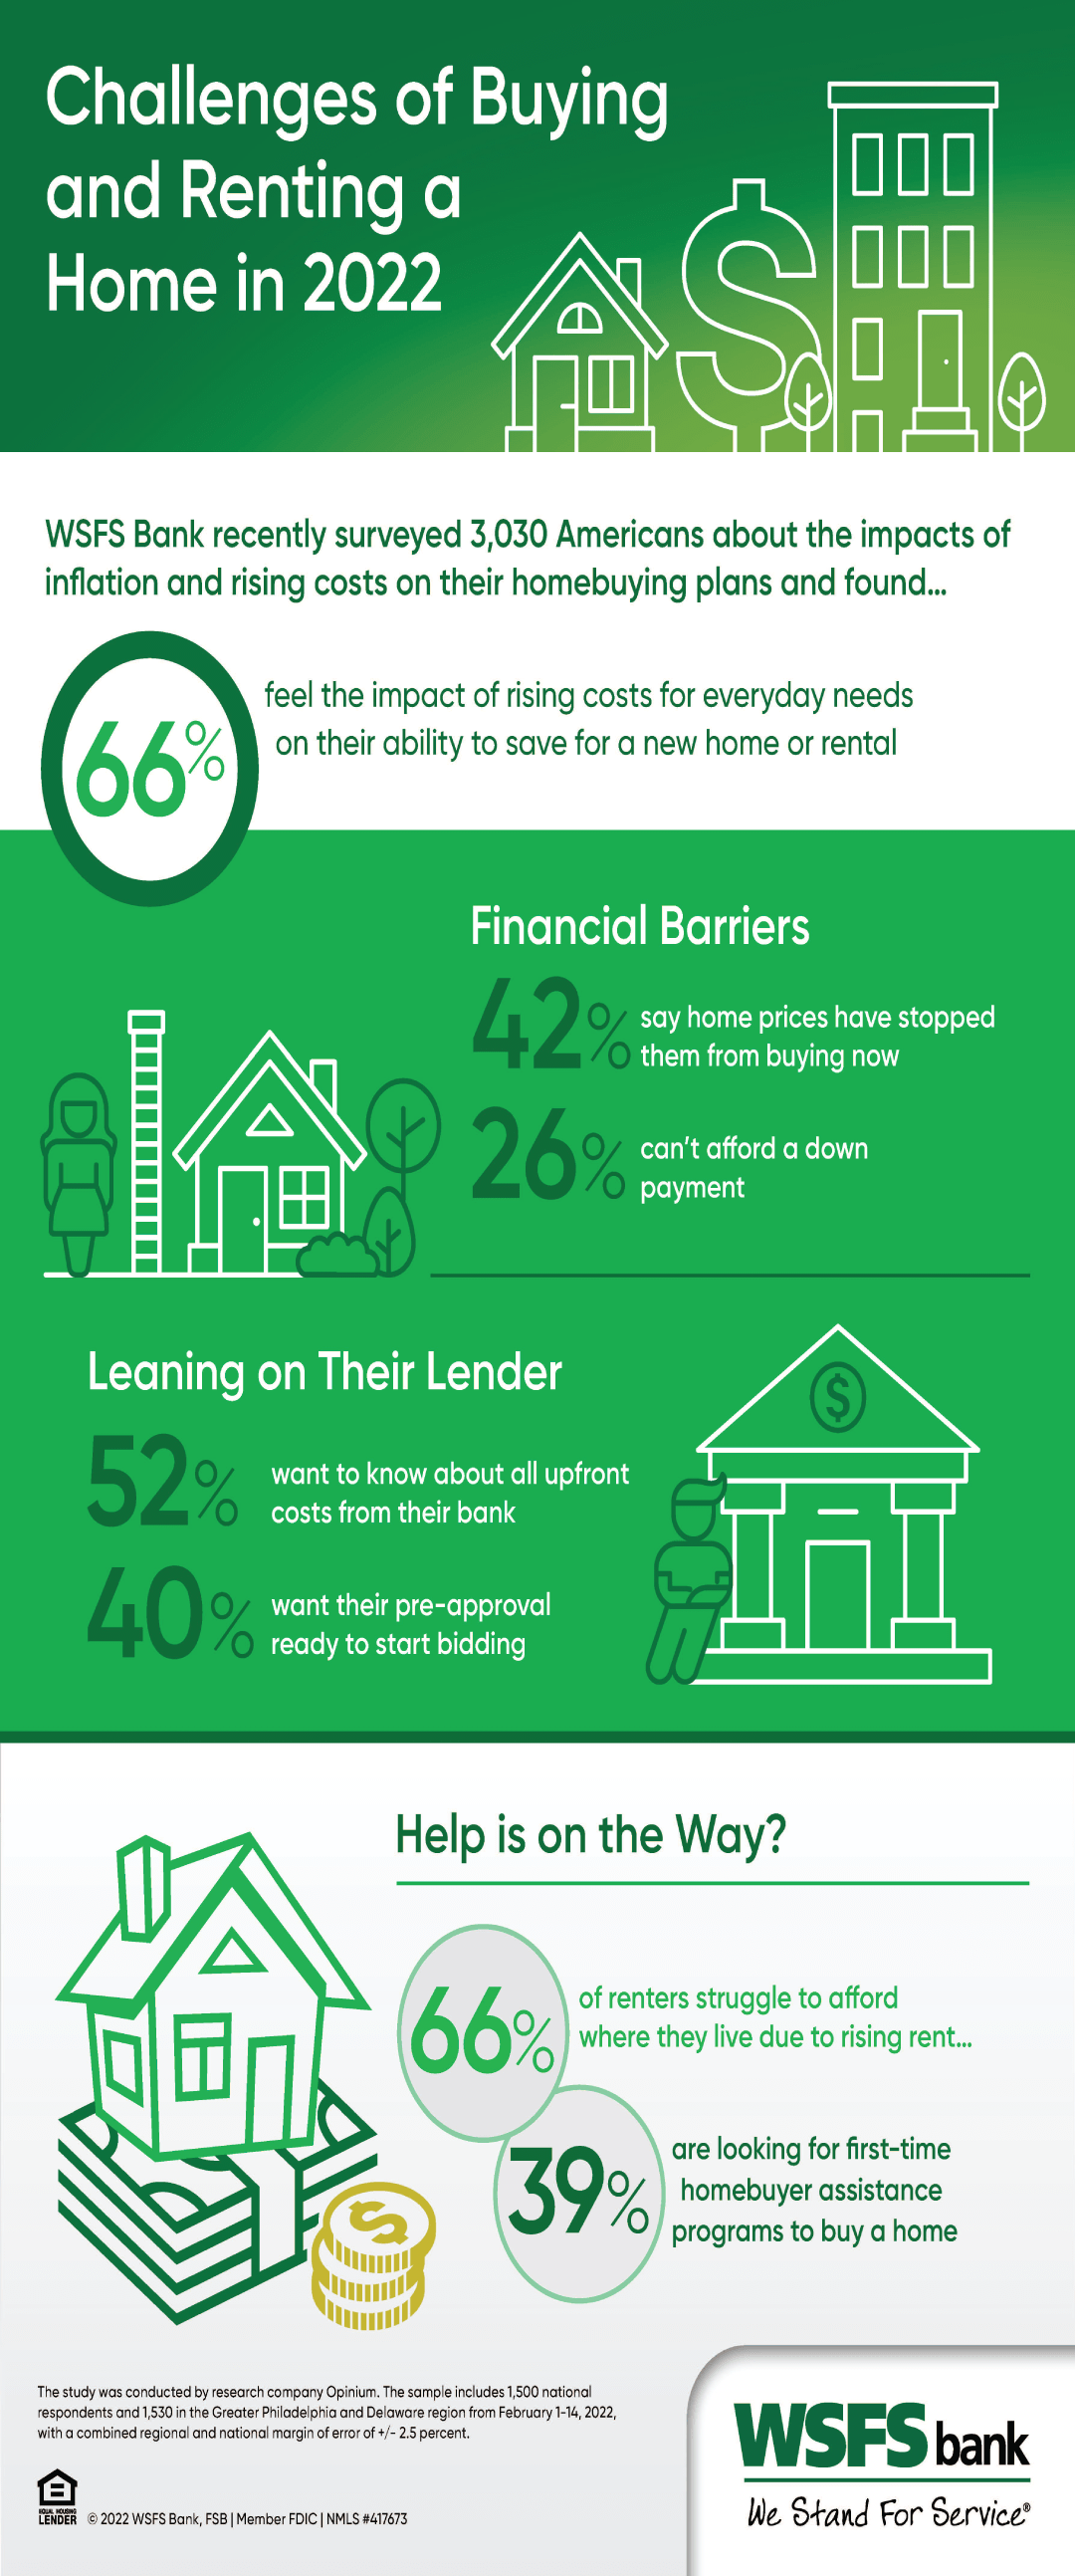 An infographic that says, “Challenges of buying and renting a home in 2022. WSFS Bank recently surveyed 3,030 Americans about the impacts of inflation and rising costs on their homebuying plans and found… 66% feel the impact of rising costs for everyday needs on their ability to save for a new home or rental. Financial Barriers: 42% say home prices have stopped them from buying now. 26% can’t afford a down payment. Leaning on their lender: 52% want to know about all upfront costs from their bank. 40% want their pre-approval ready to start bidding. Help is on the way? 66% of renters struggle to afford where they live due to rising rent. 39% are looking for first-time homebuyer assistance programs to buy a home. The study was conducted by research company Opinium. The sample includes 1,500 national respondents and 1,530 in the Greater Philadelphia and Delaware region from February 1-14, 2022, with a combined regional and national margin of error of +/- 2.5 percent.”